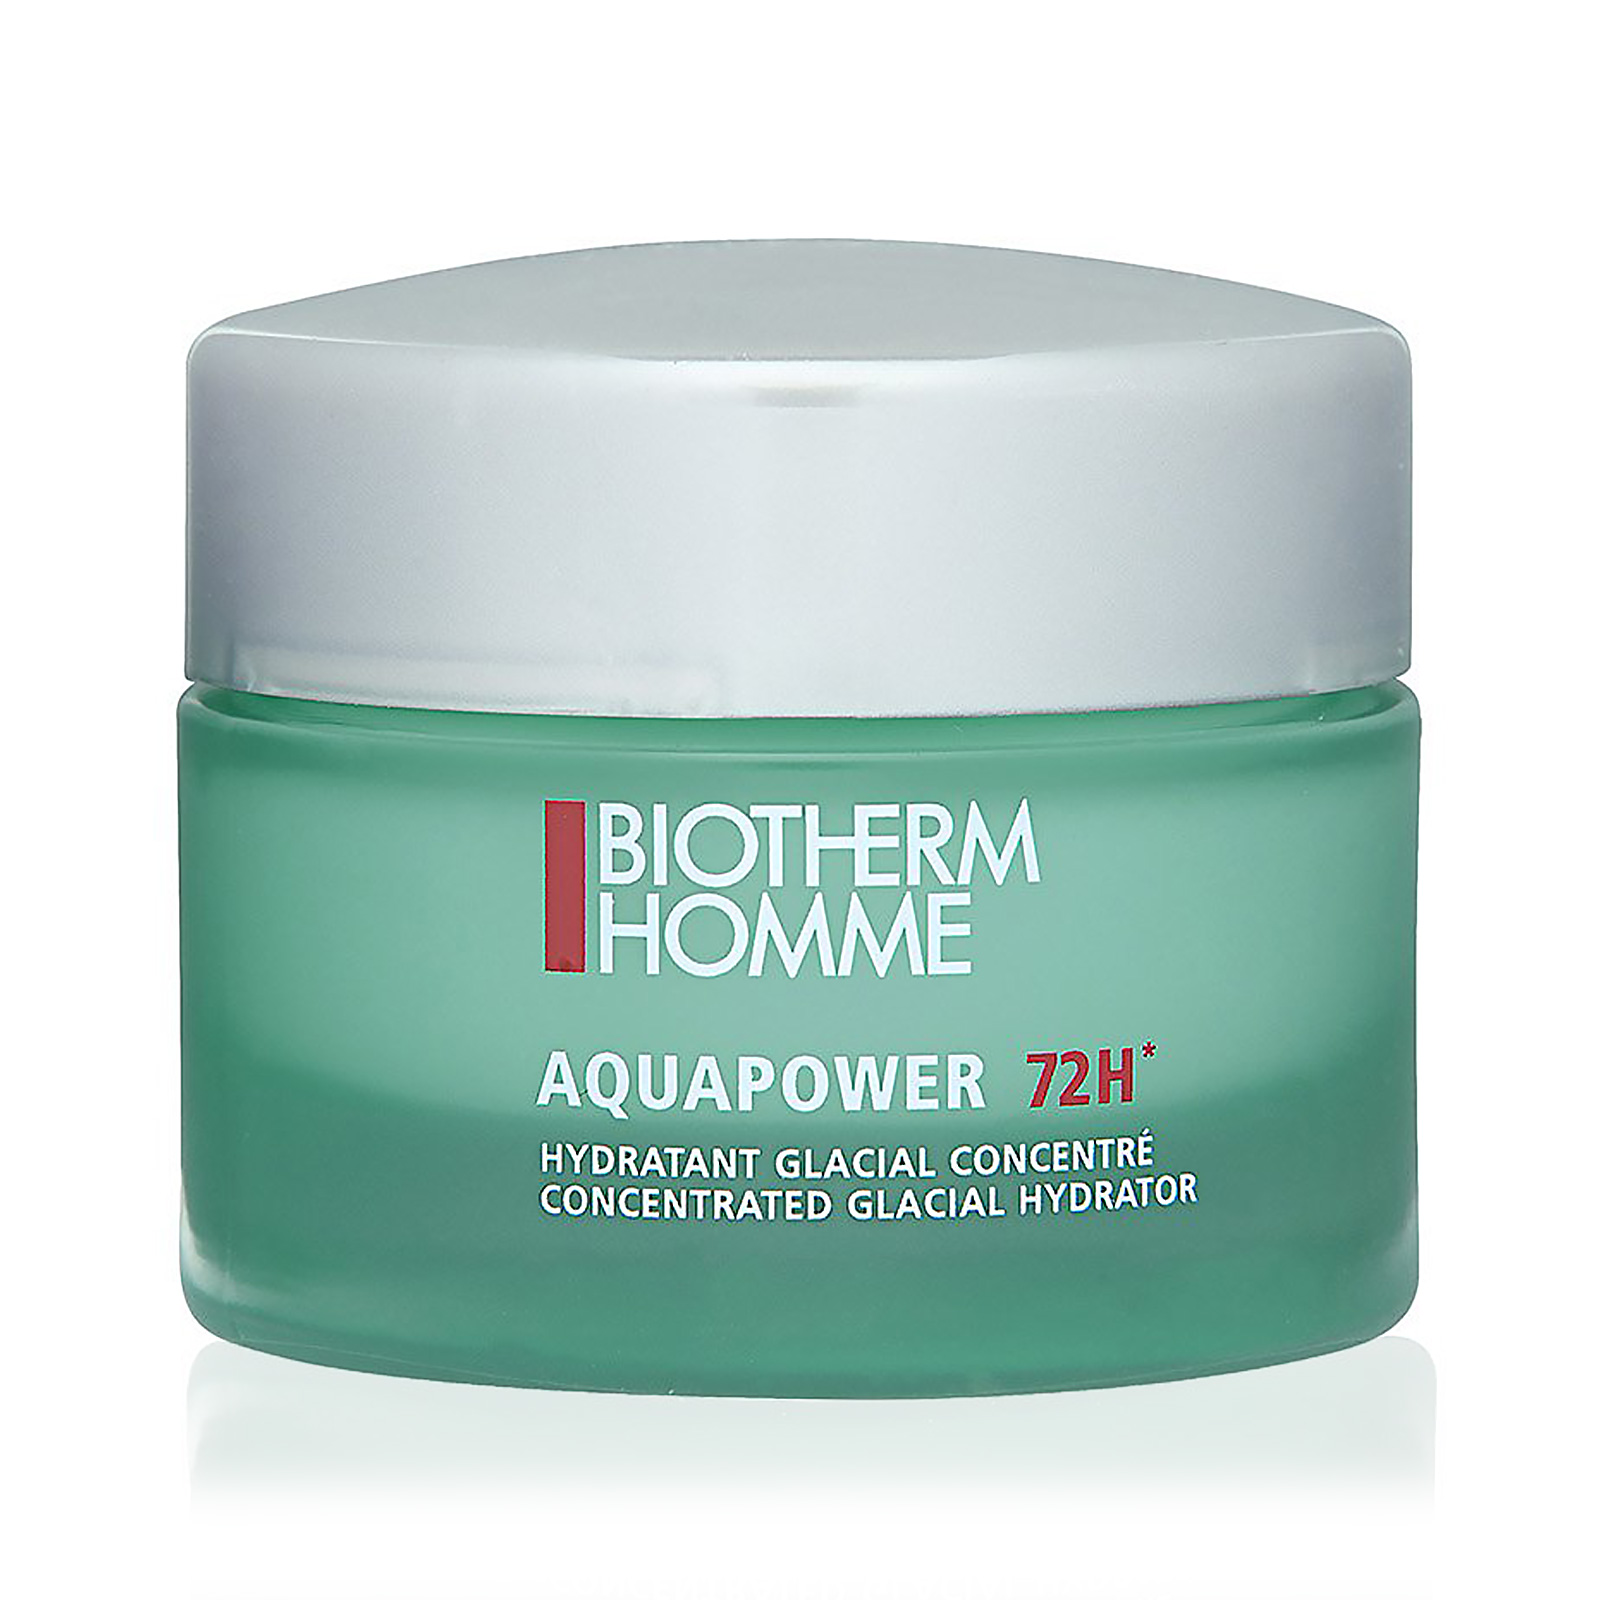 Homme AquaPower 72 H Concentrated Glacial Hydrator